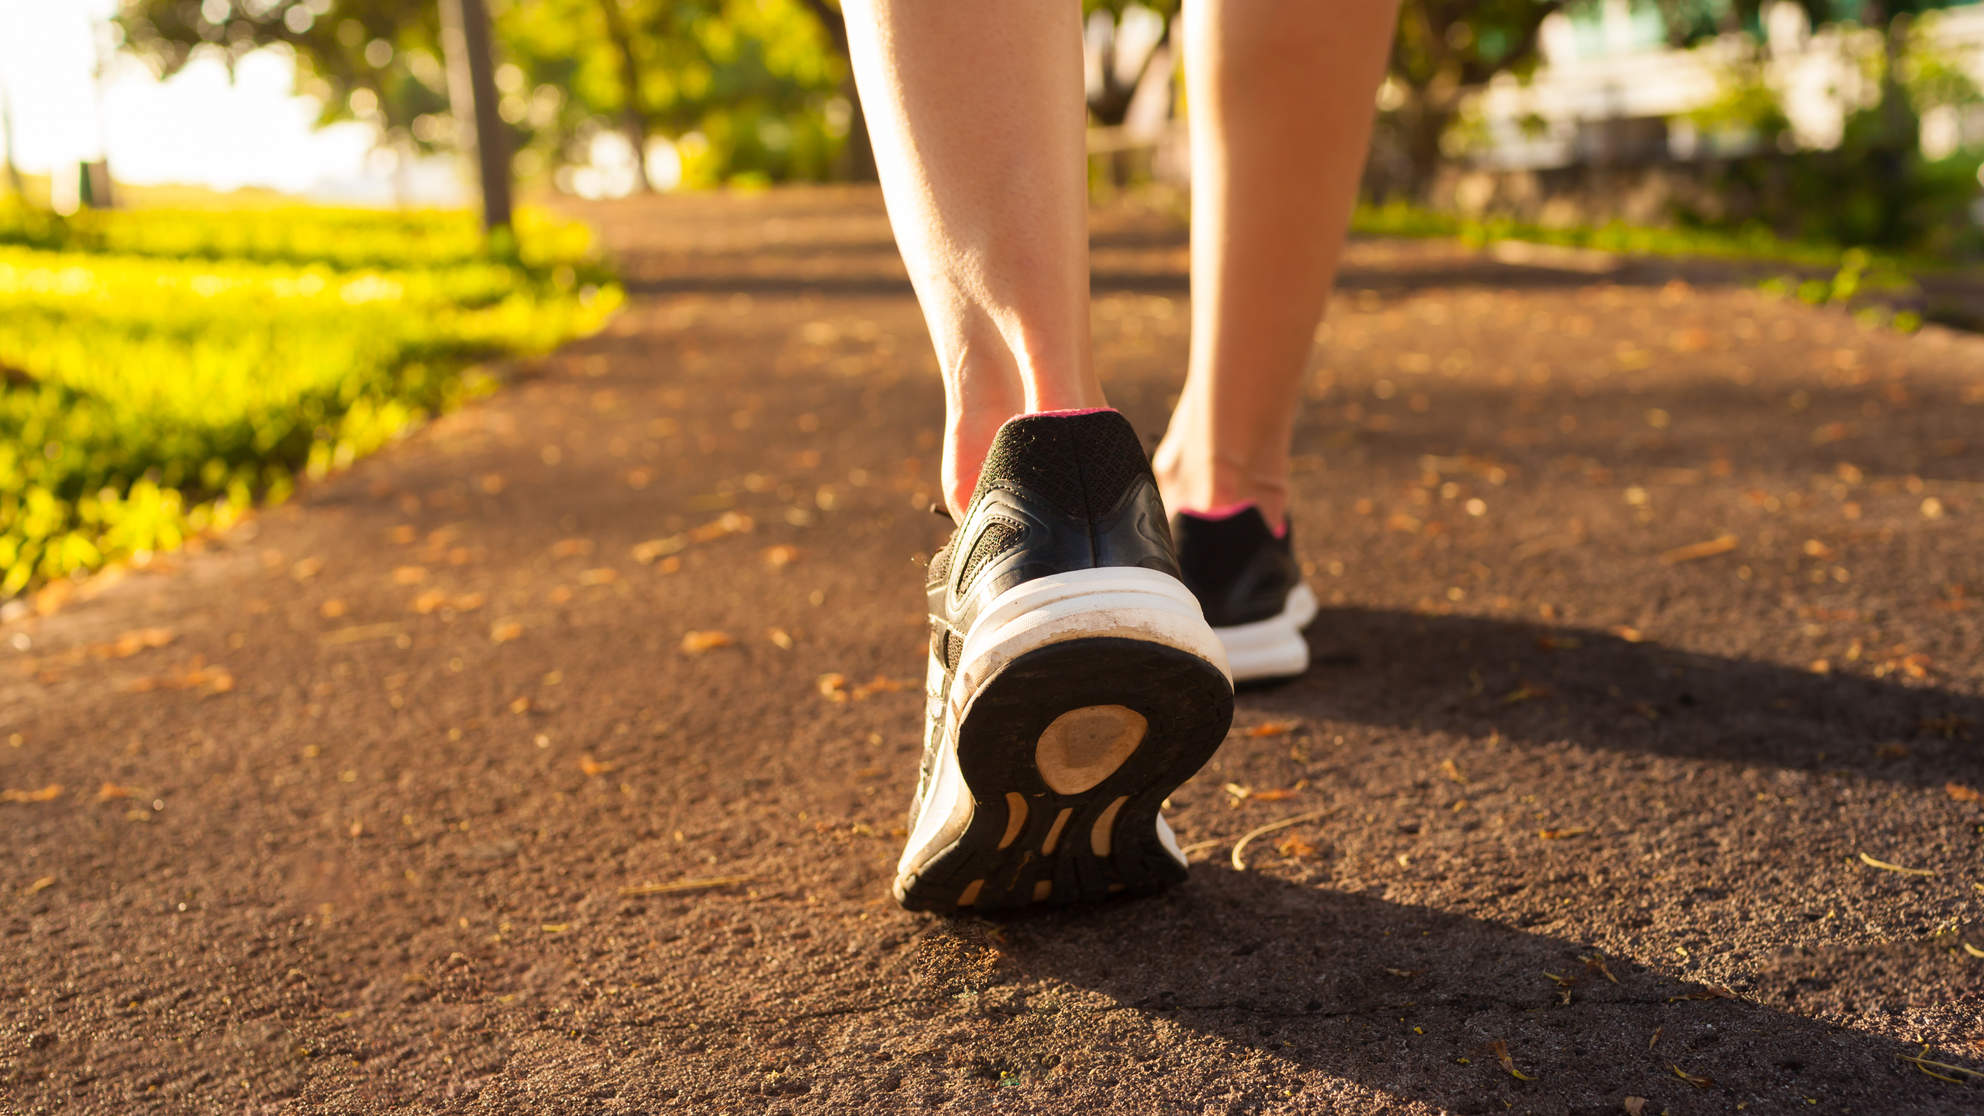 The Best Walking Workouts, According to Fitness Experts - Health